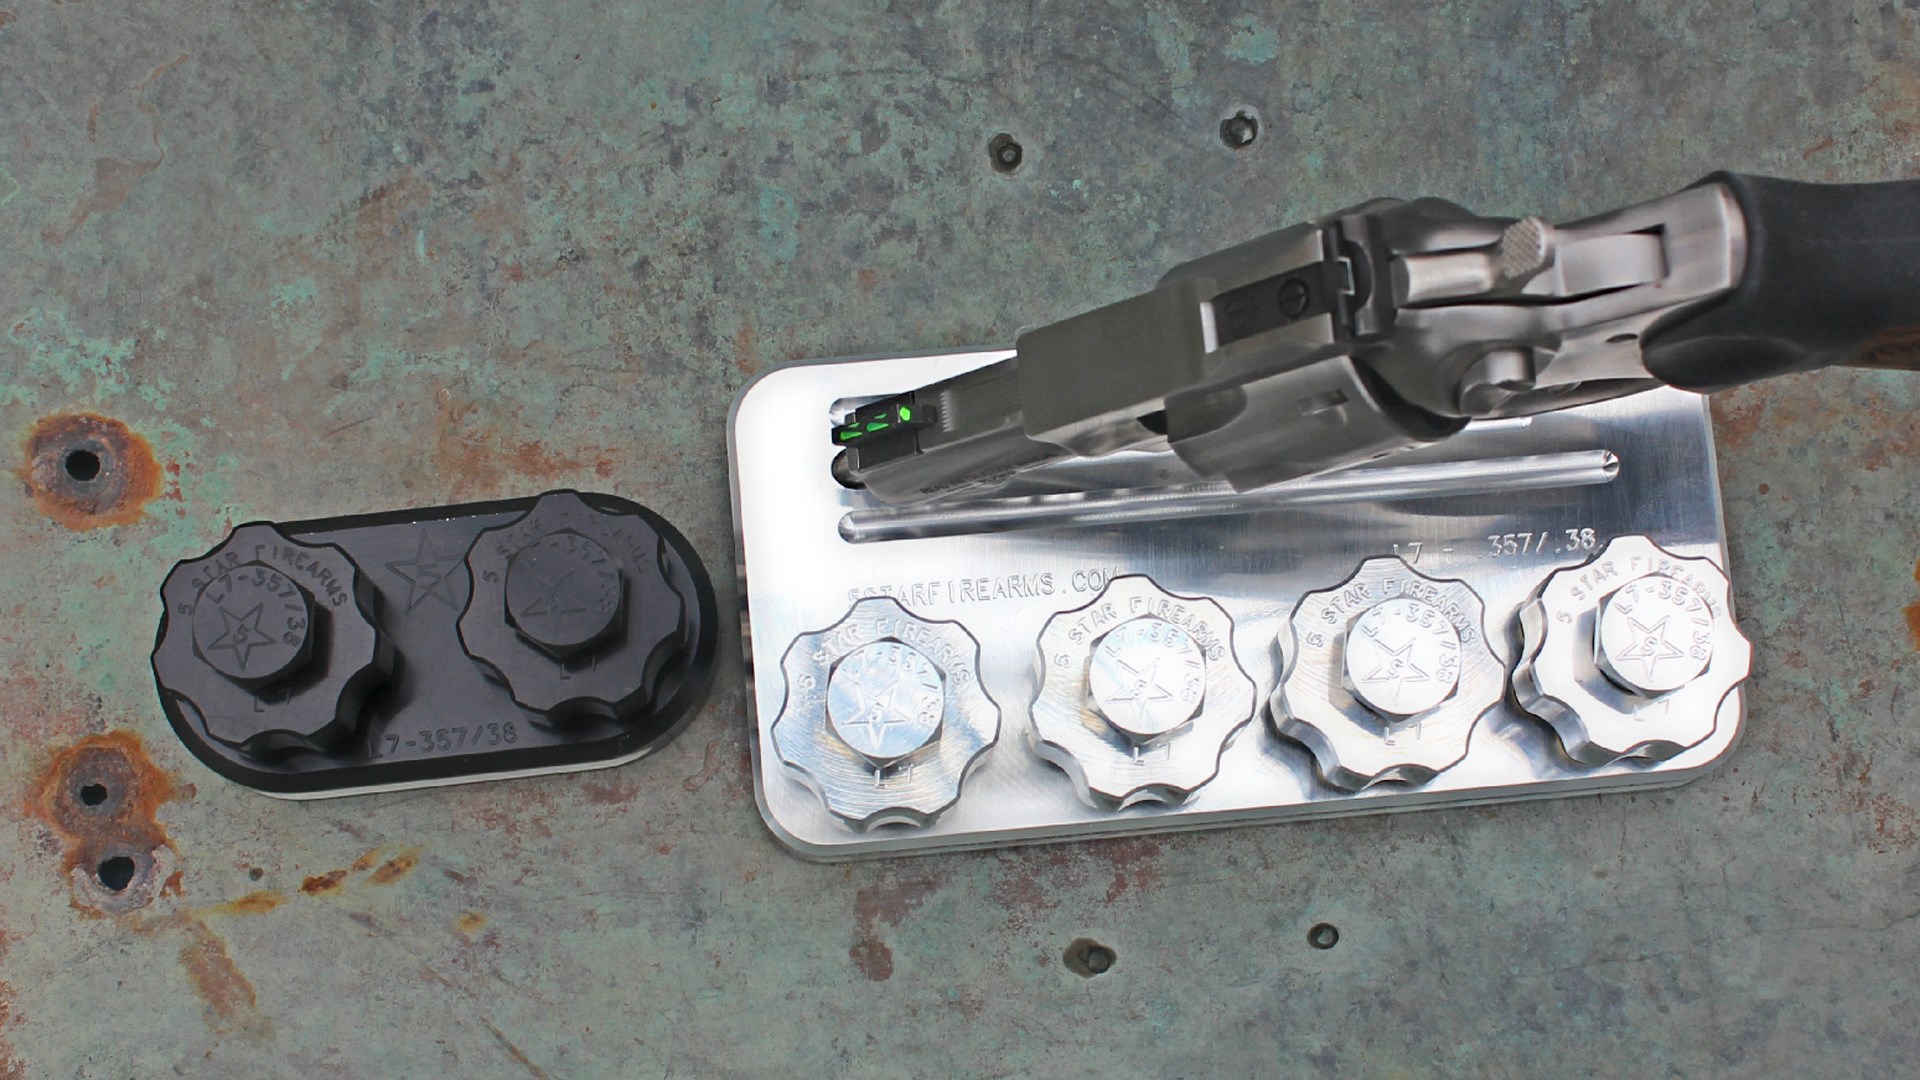 5 Star Firearms loading block metal aluminum black and silver shown with Ruger GP-100 revolver on right top